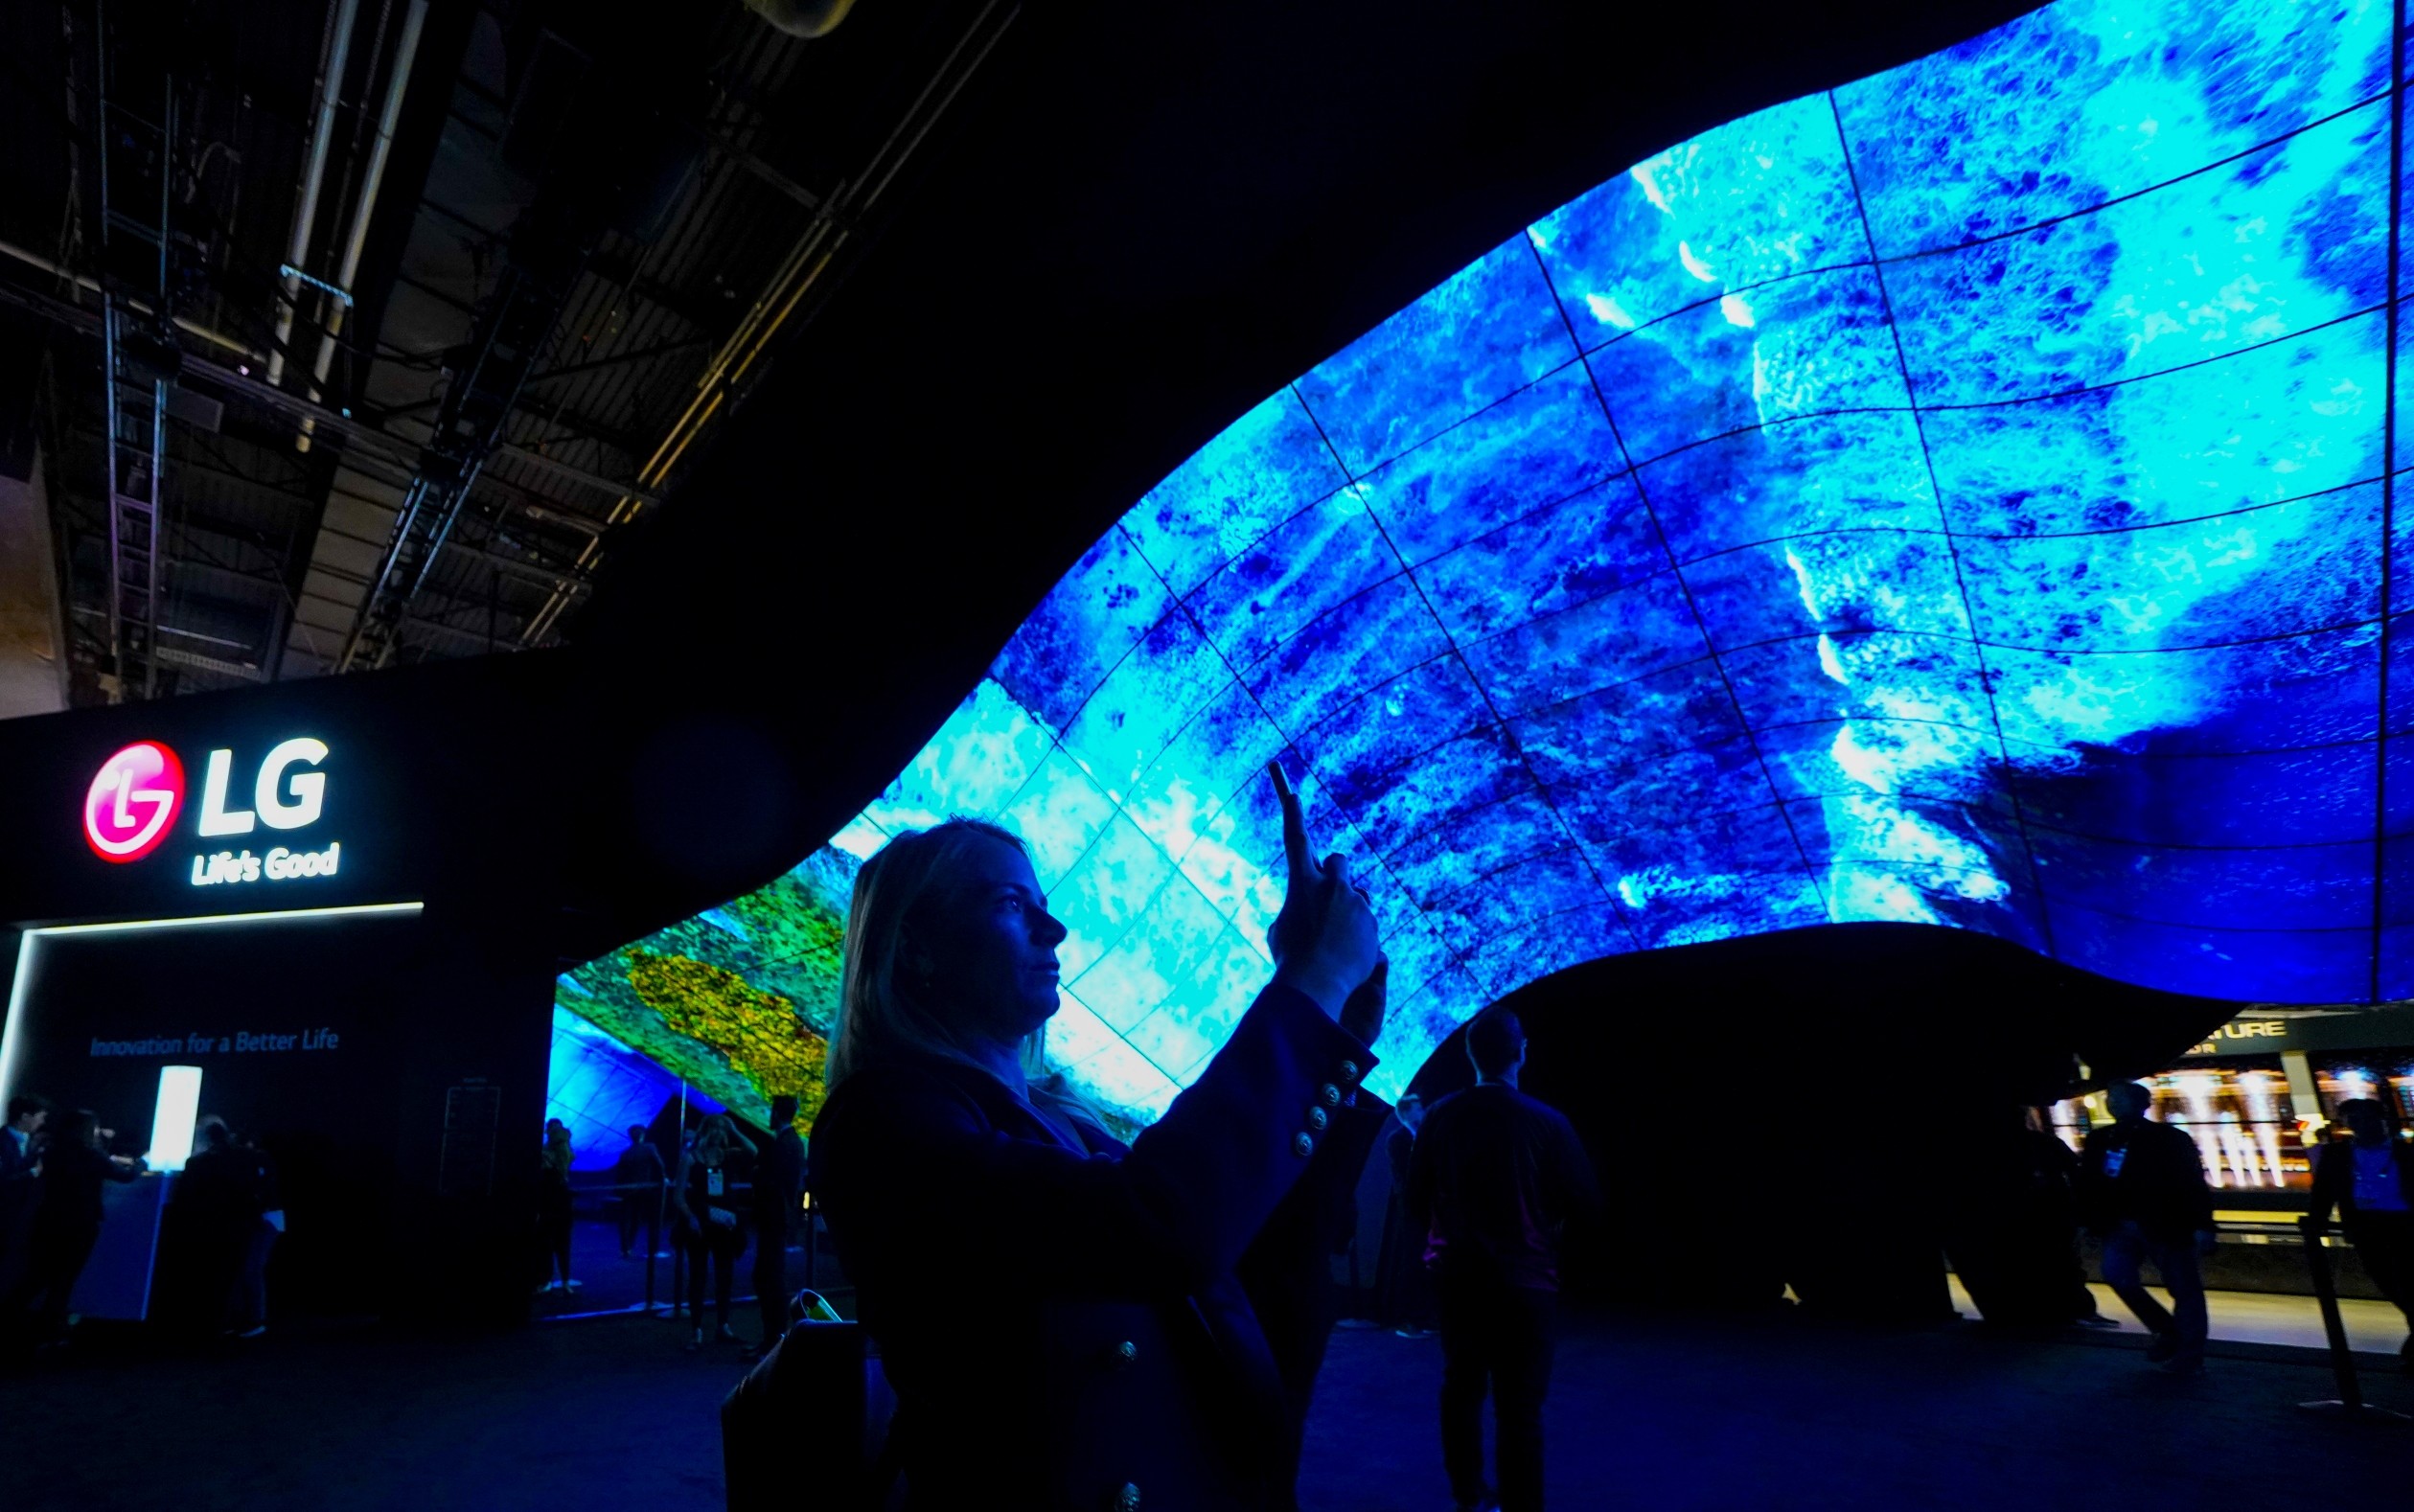 A woman taking a photo of the mesmerizing LG OLED Wave at CES 2020 as it displays vivid blue waves crashing against the coastline